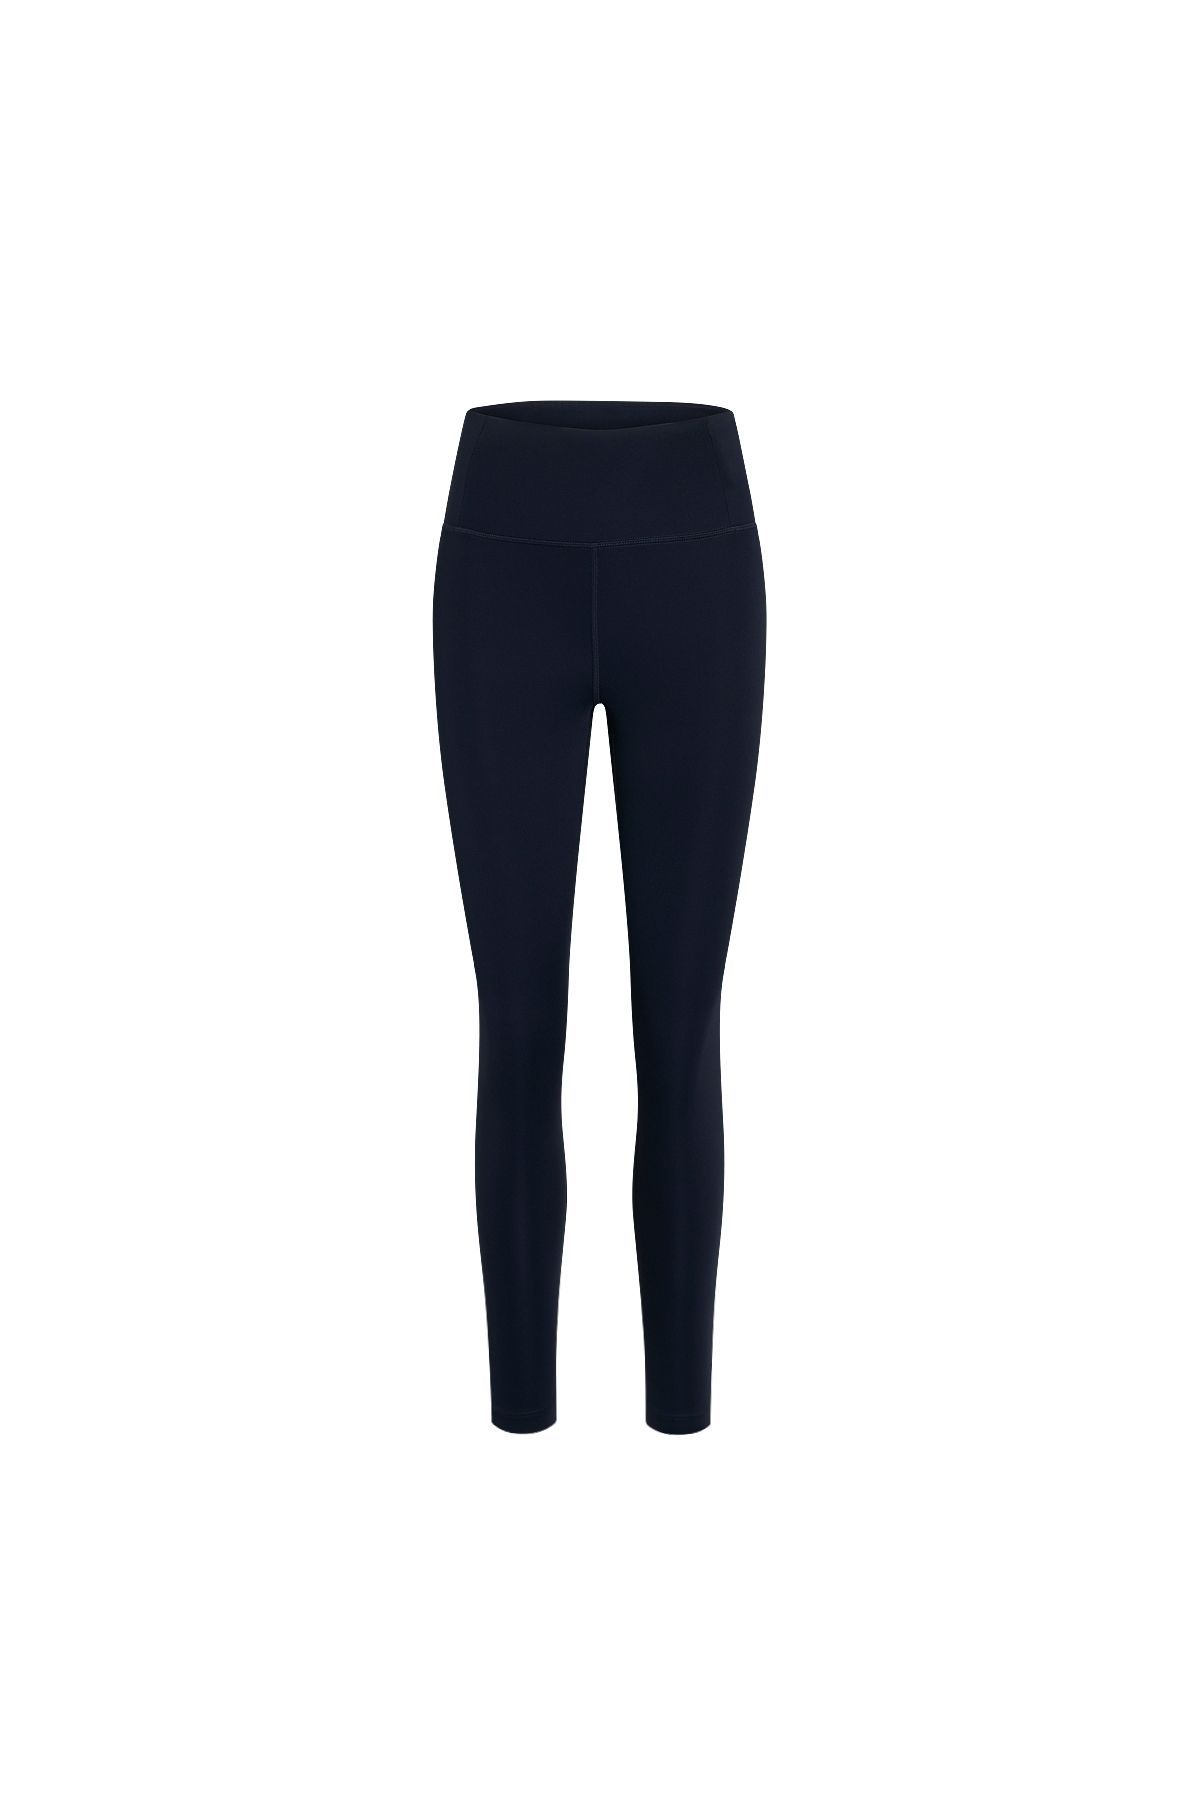 Girlfriend Collective Women's Float High-Rise Legging, Midnight / XS / Normal